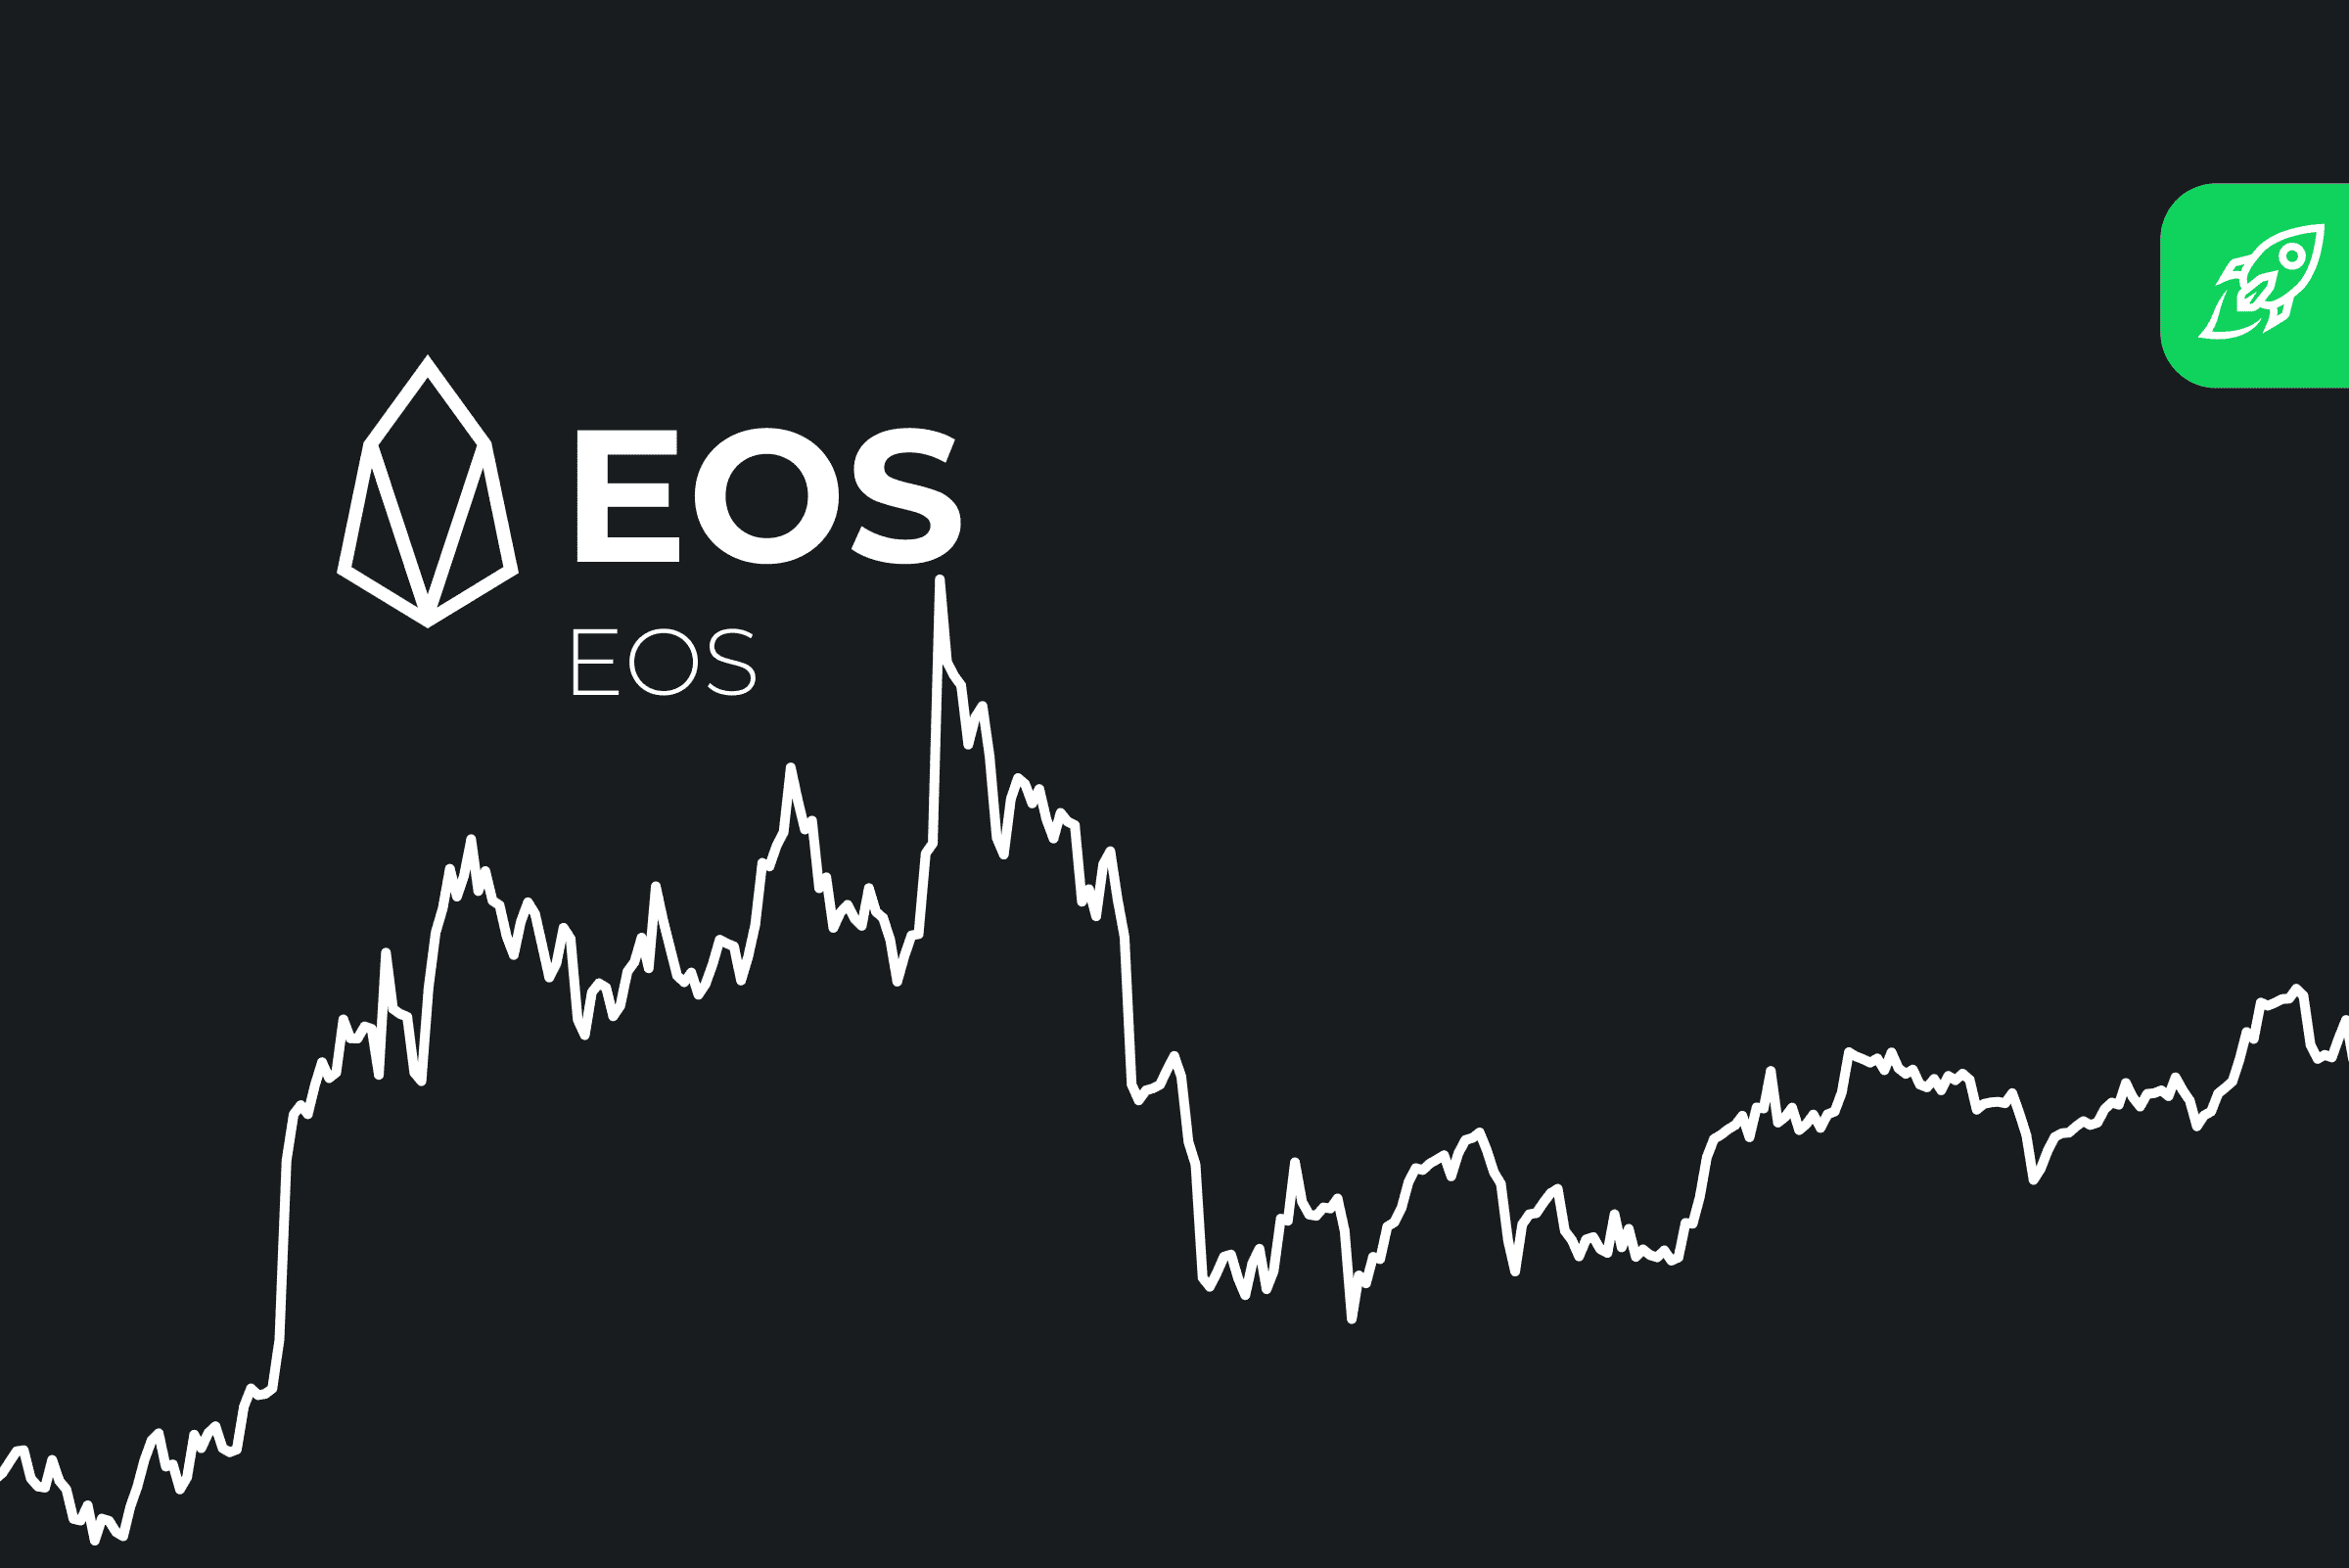 EOS Price Today | EOS Price Prediction, Live Chart and News Forecast - CoinGape